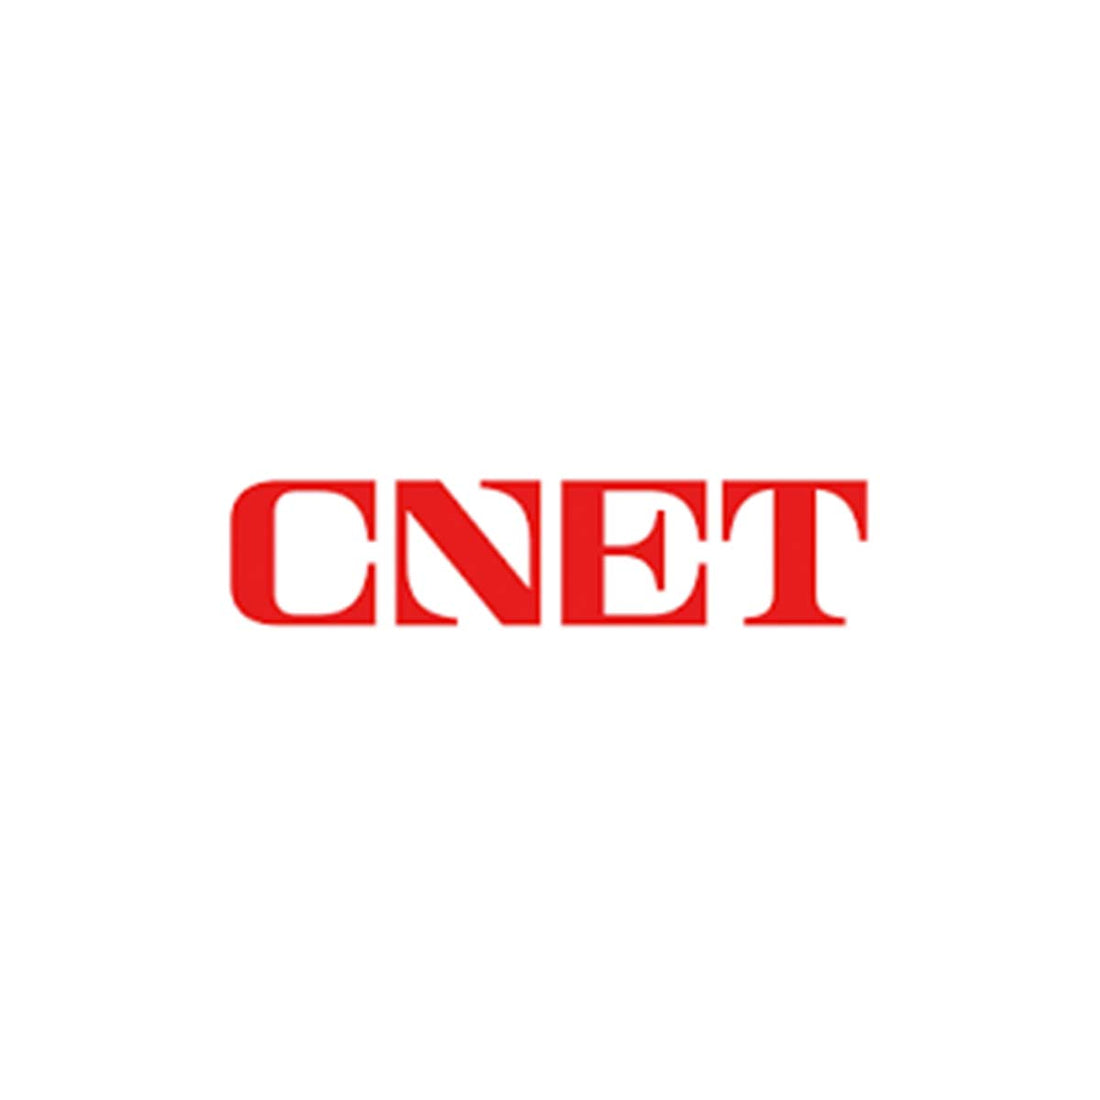 CNET logo on a white background